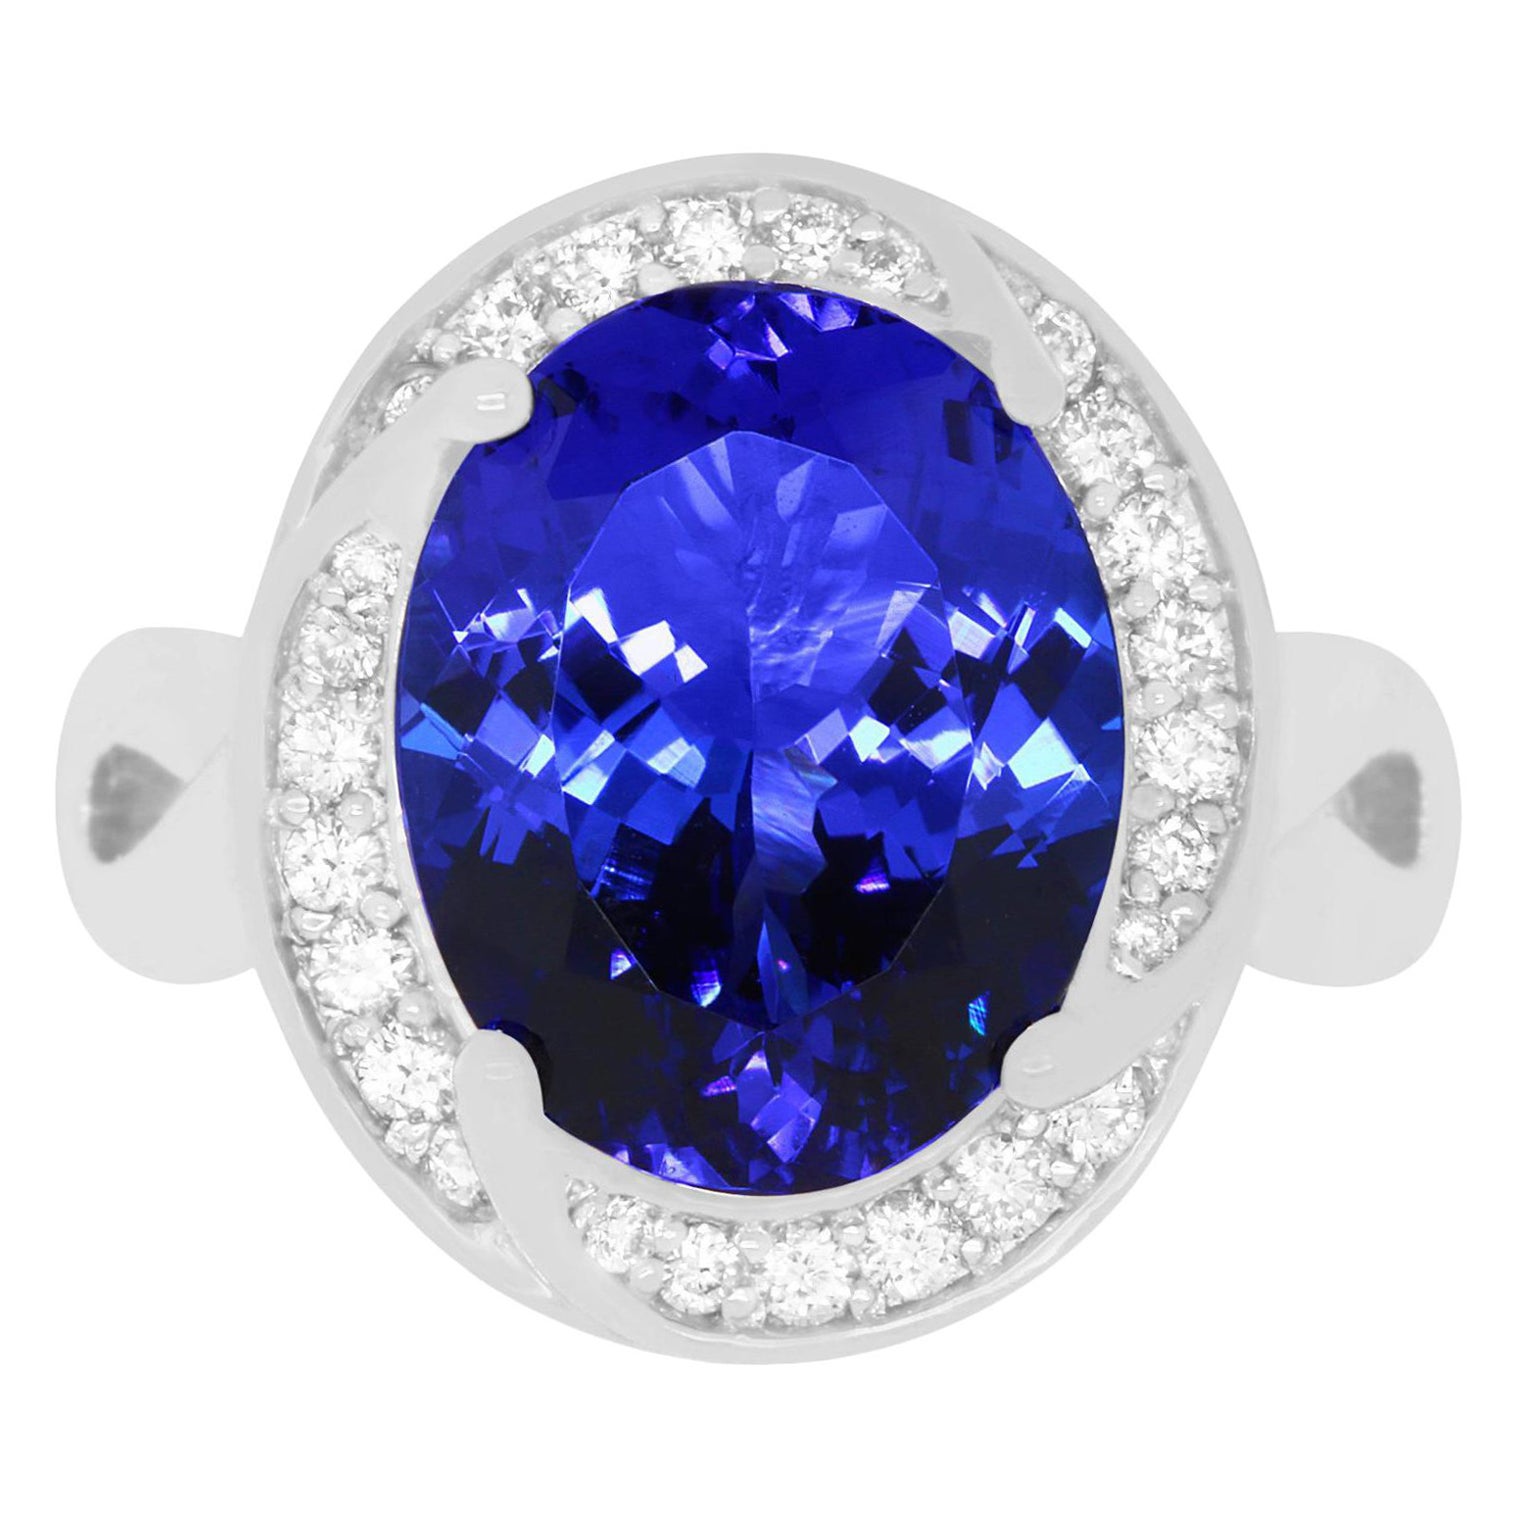 6.31 Carat Oval Shaped Tanzanite and 0.31 Carat White Diamond Ring For Sale